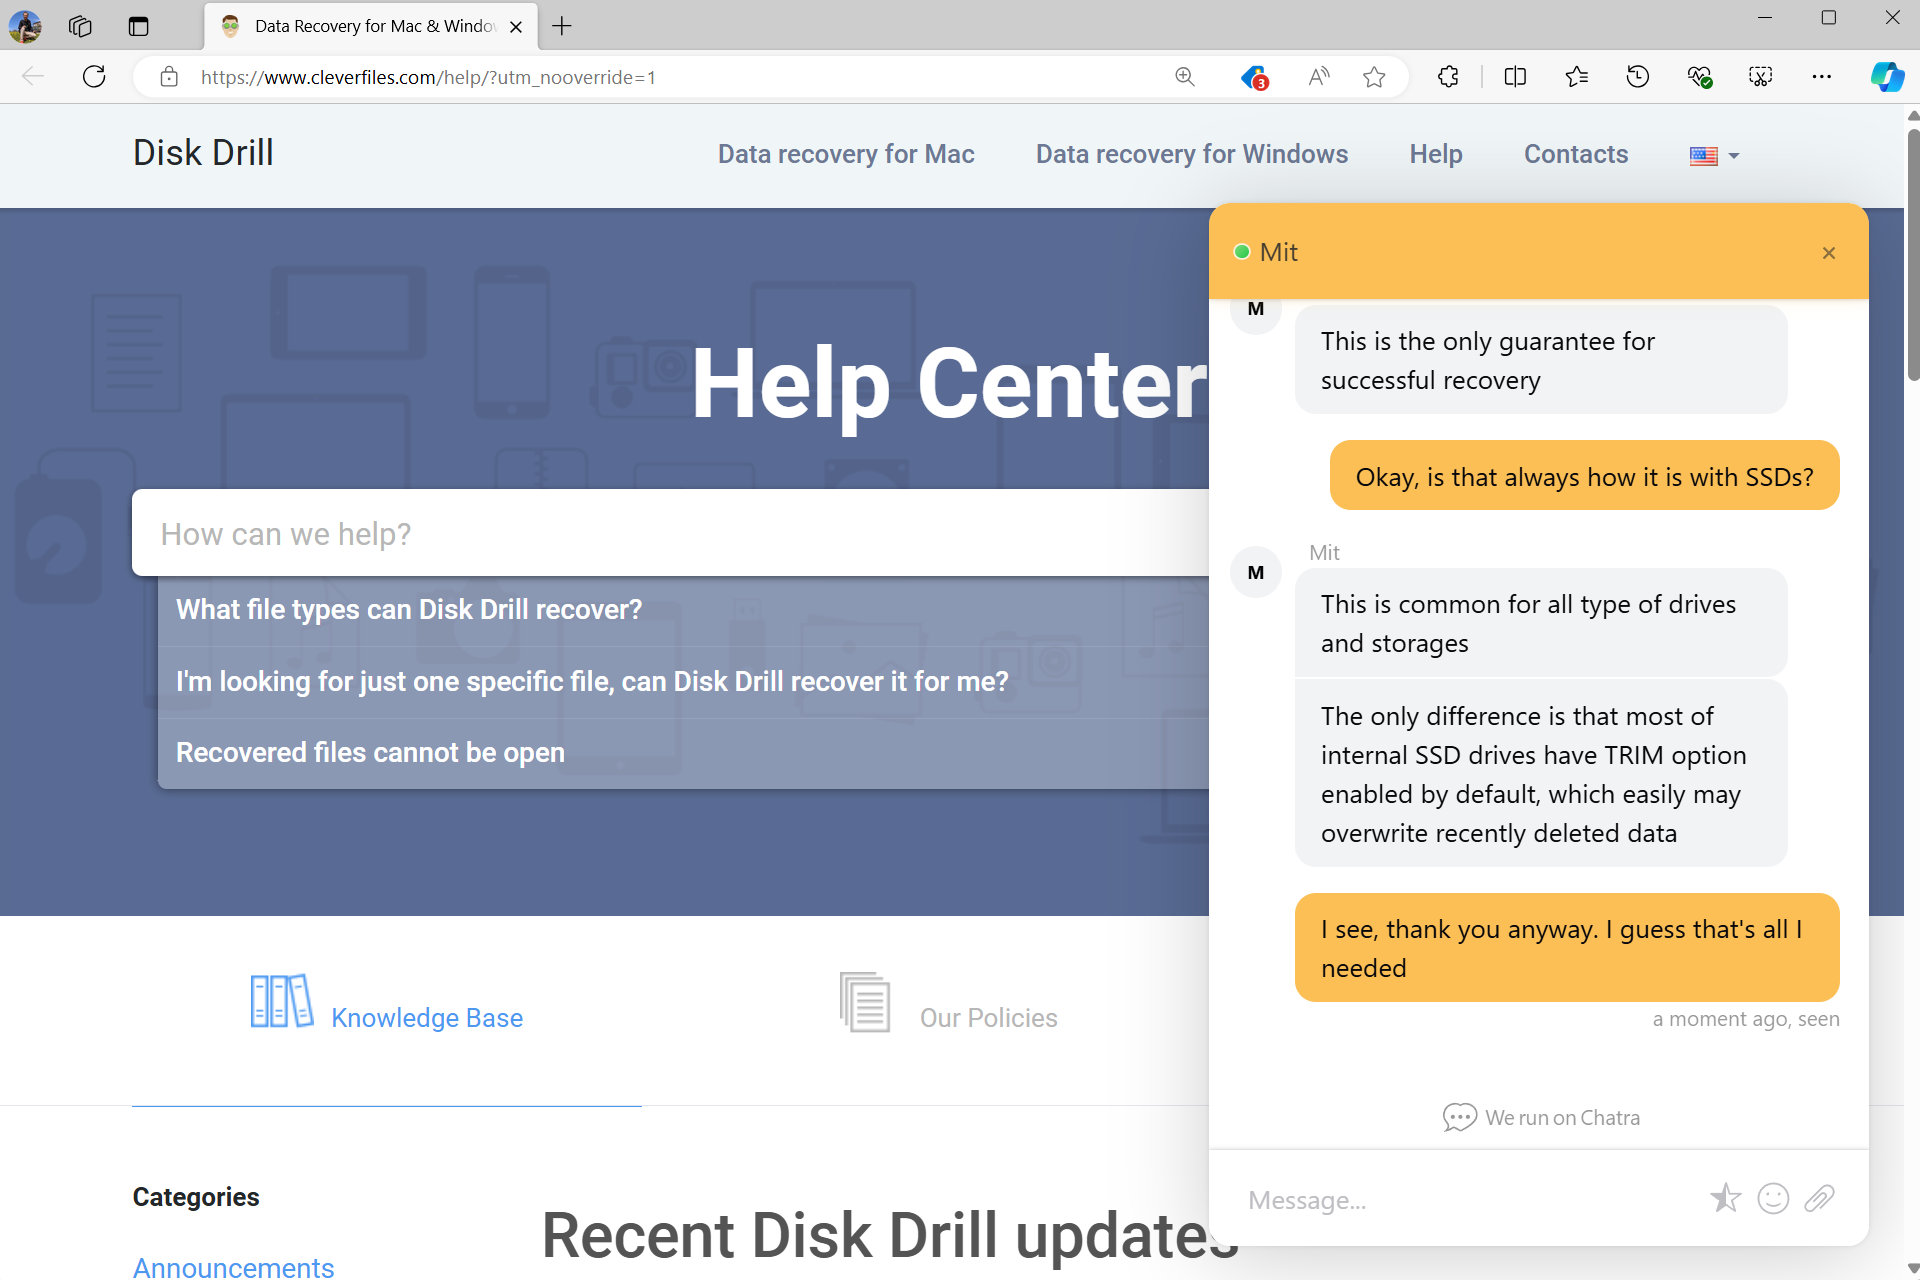 Disk Drill Pro comes with live chat for support.